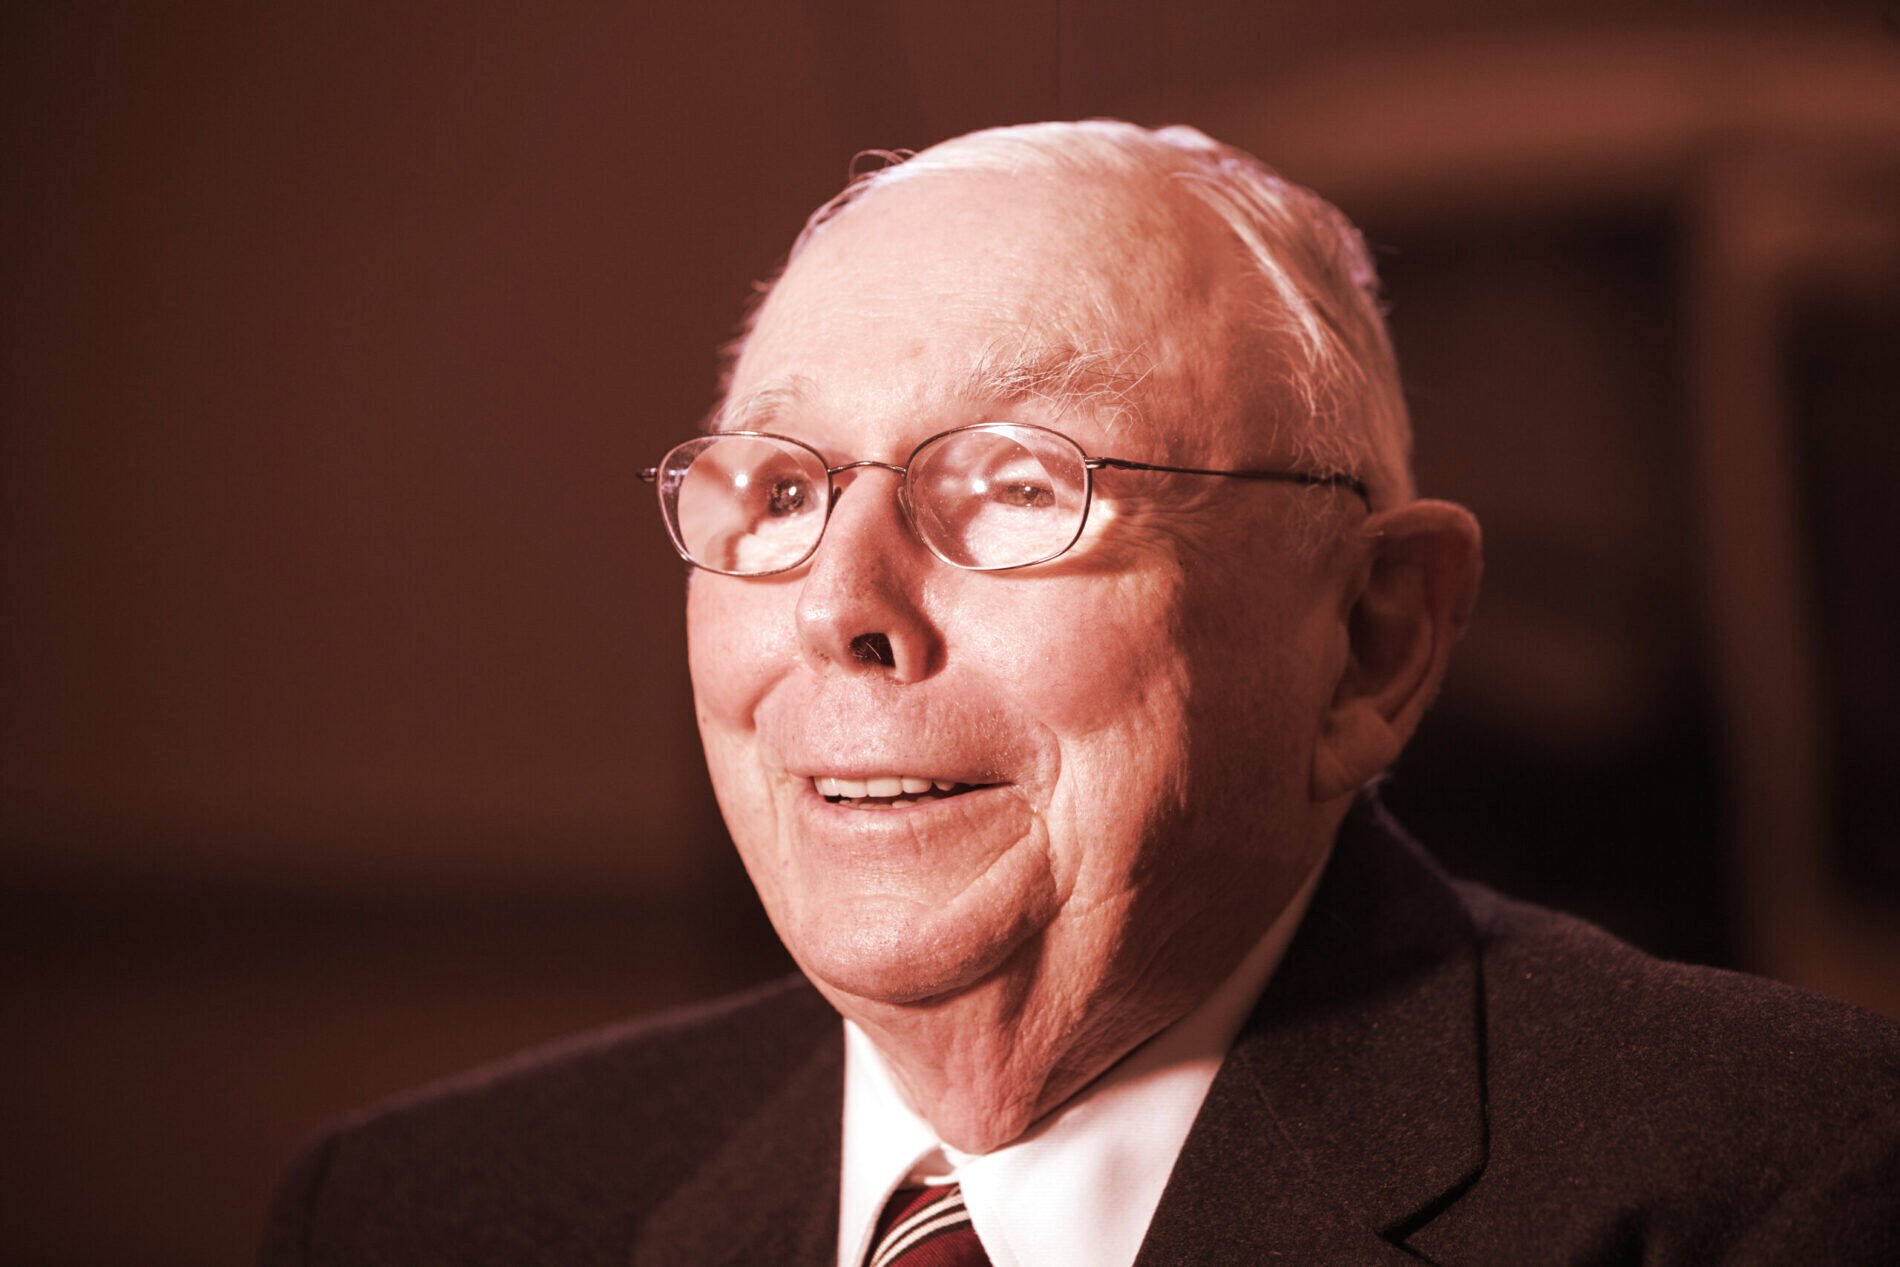 China ‘Made the Correct Decision’ to Ban Cryptocurrencies: Charlie Munger